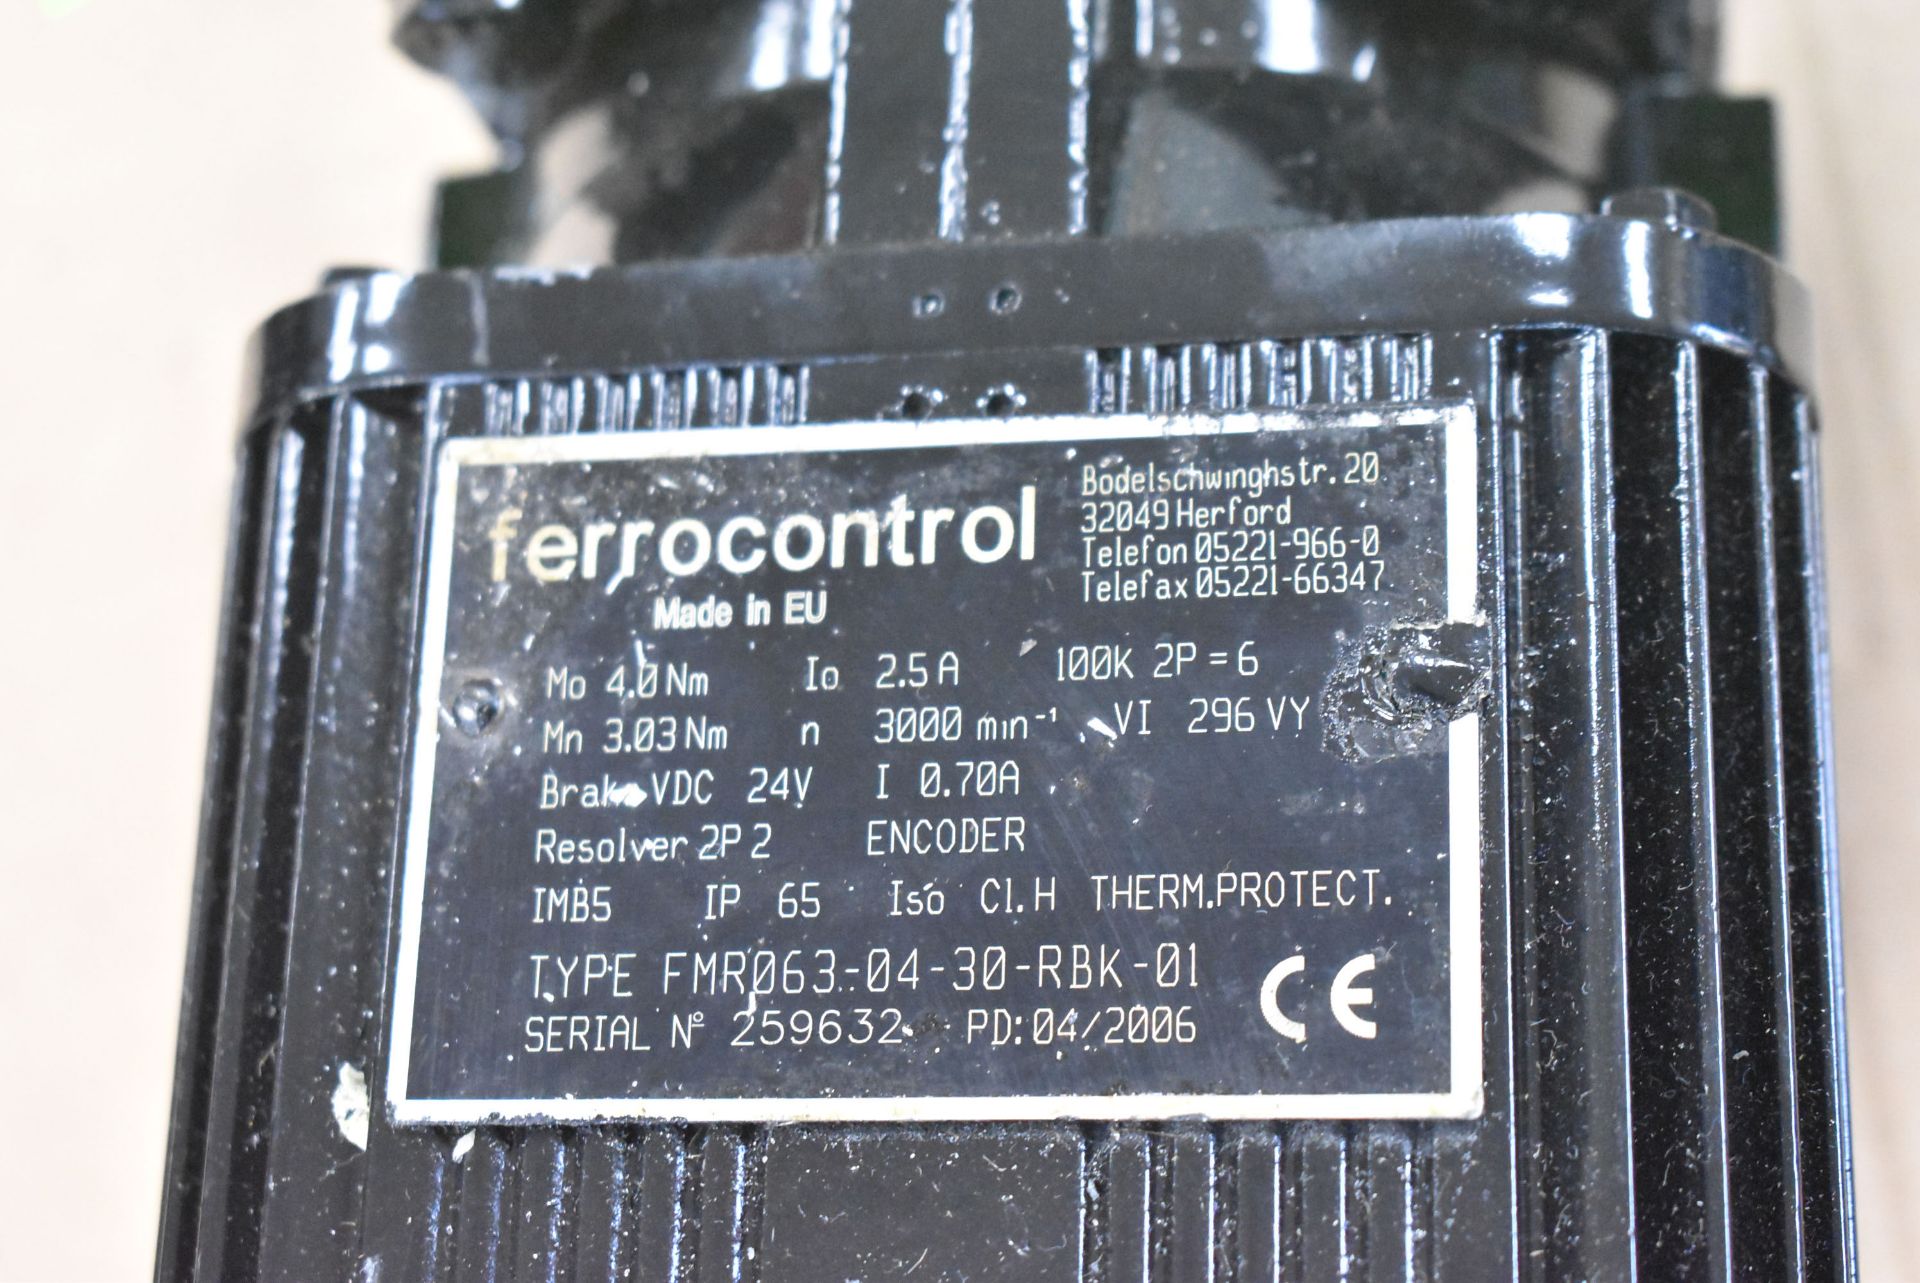 FERROCONTROL (2006) FMR063-04-30-RBK-01 X-AXIS SERVO MOTOR AND GEARBOX WITH 3000 RPM, S/N 259632 - Image 2 of 6